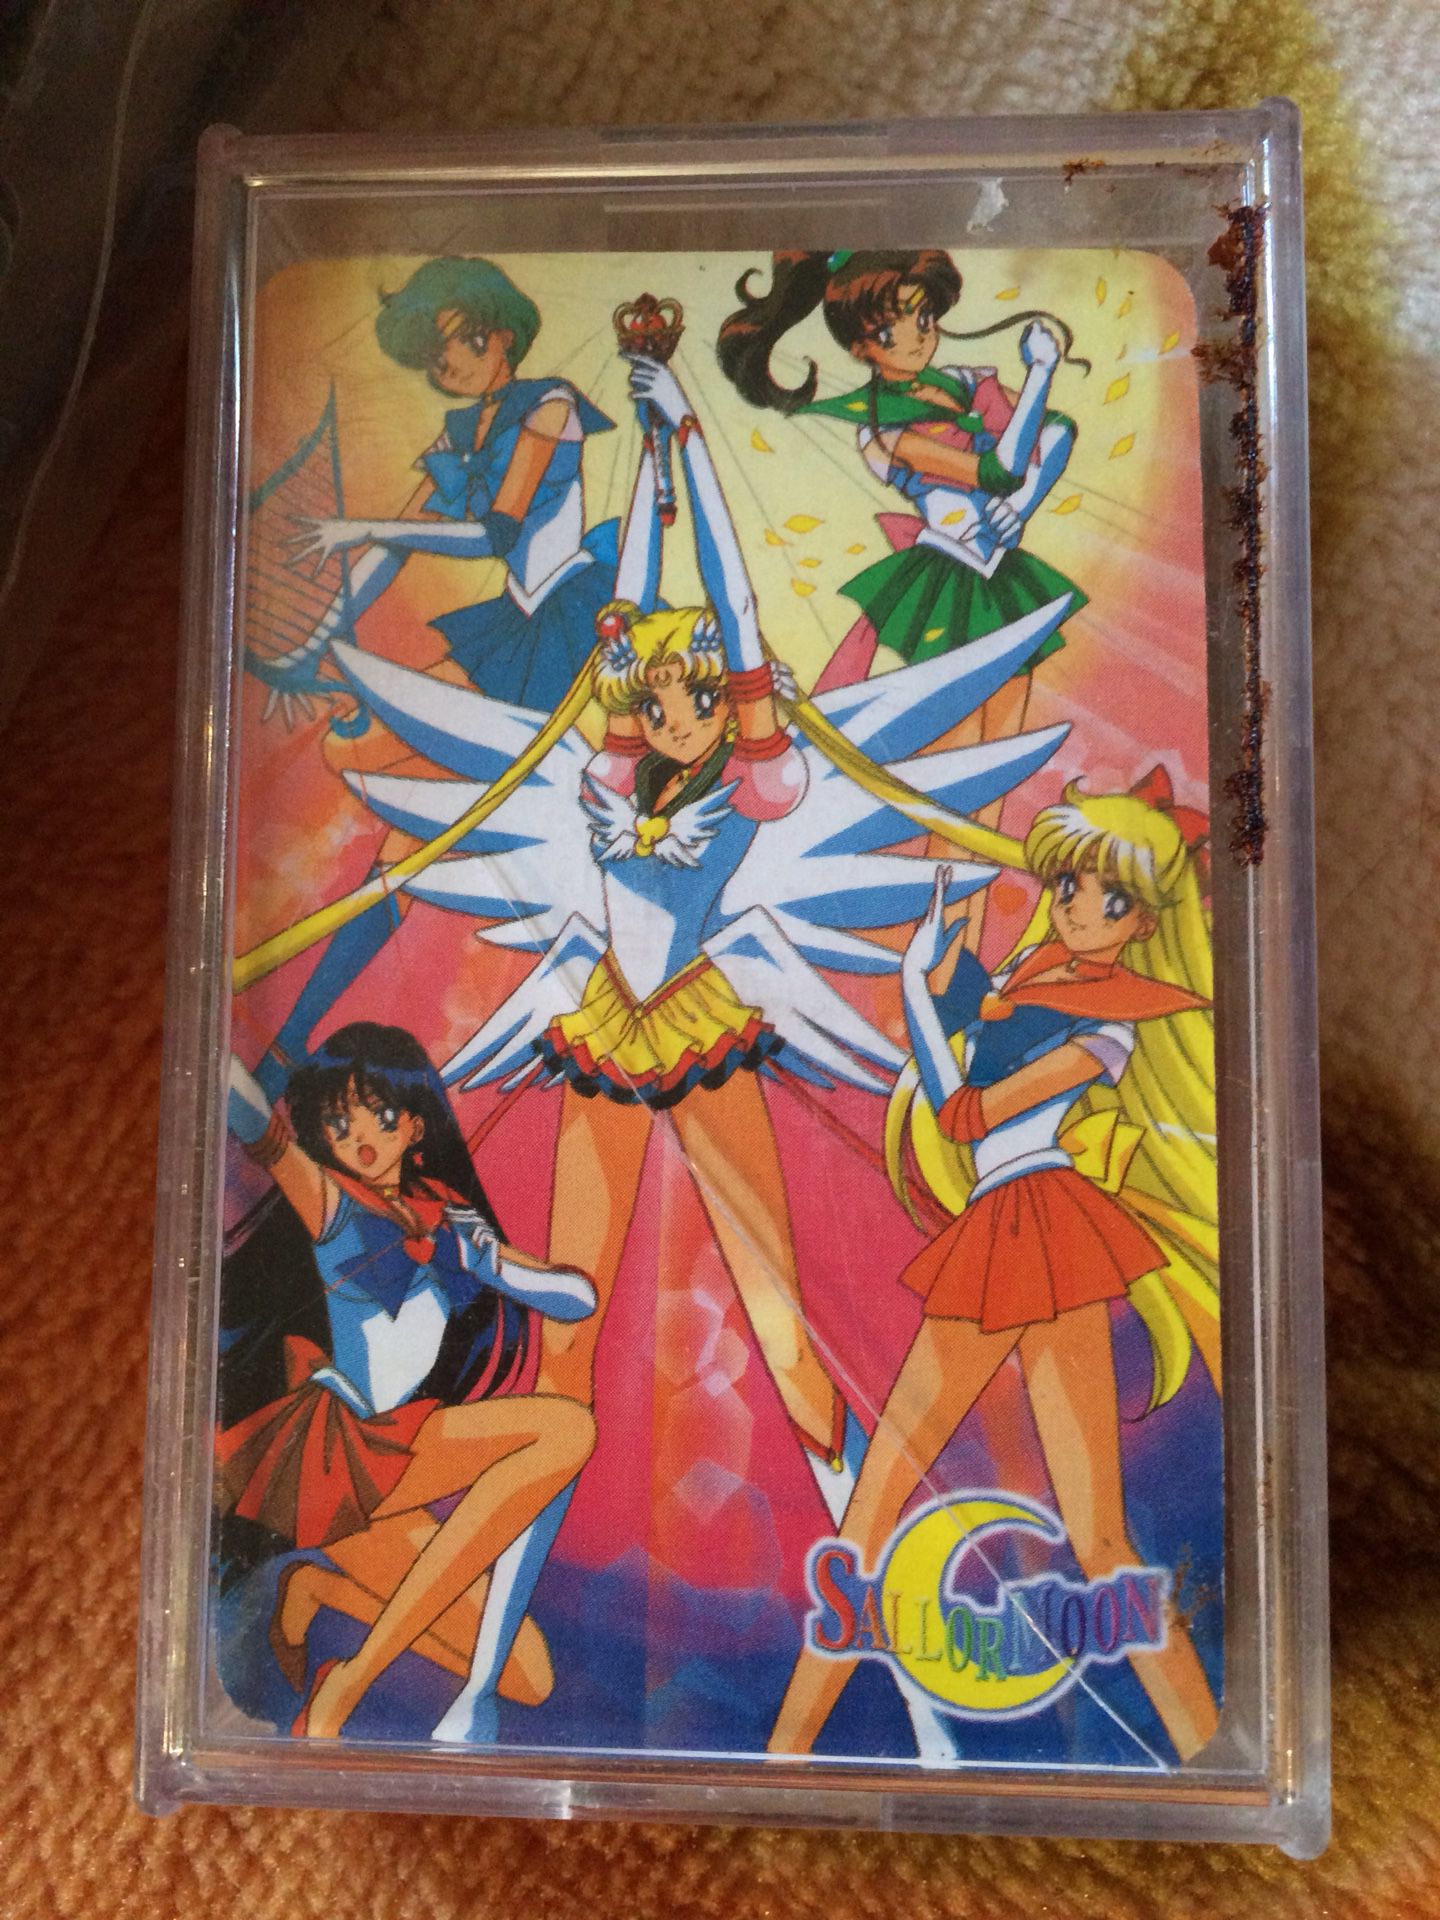 Sailor moon playing deck of cards